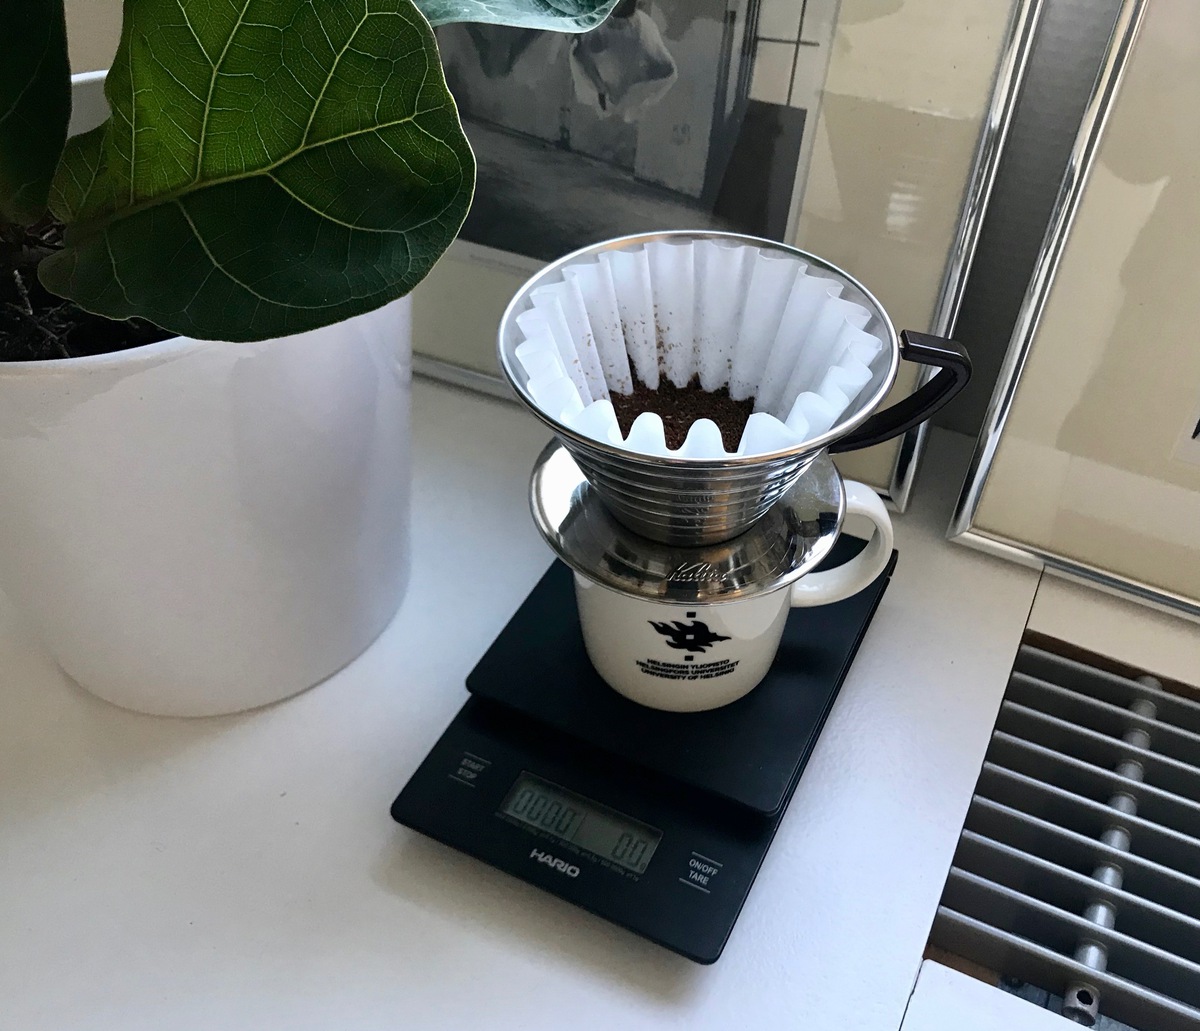 A Kalita filter cone filled with coffee grounds. The cone is on a mug and the mug is on a balance.